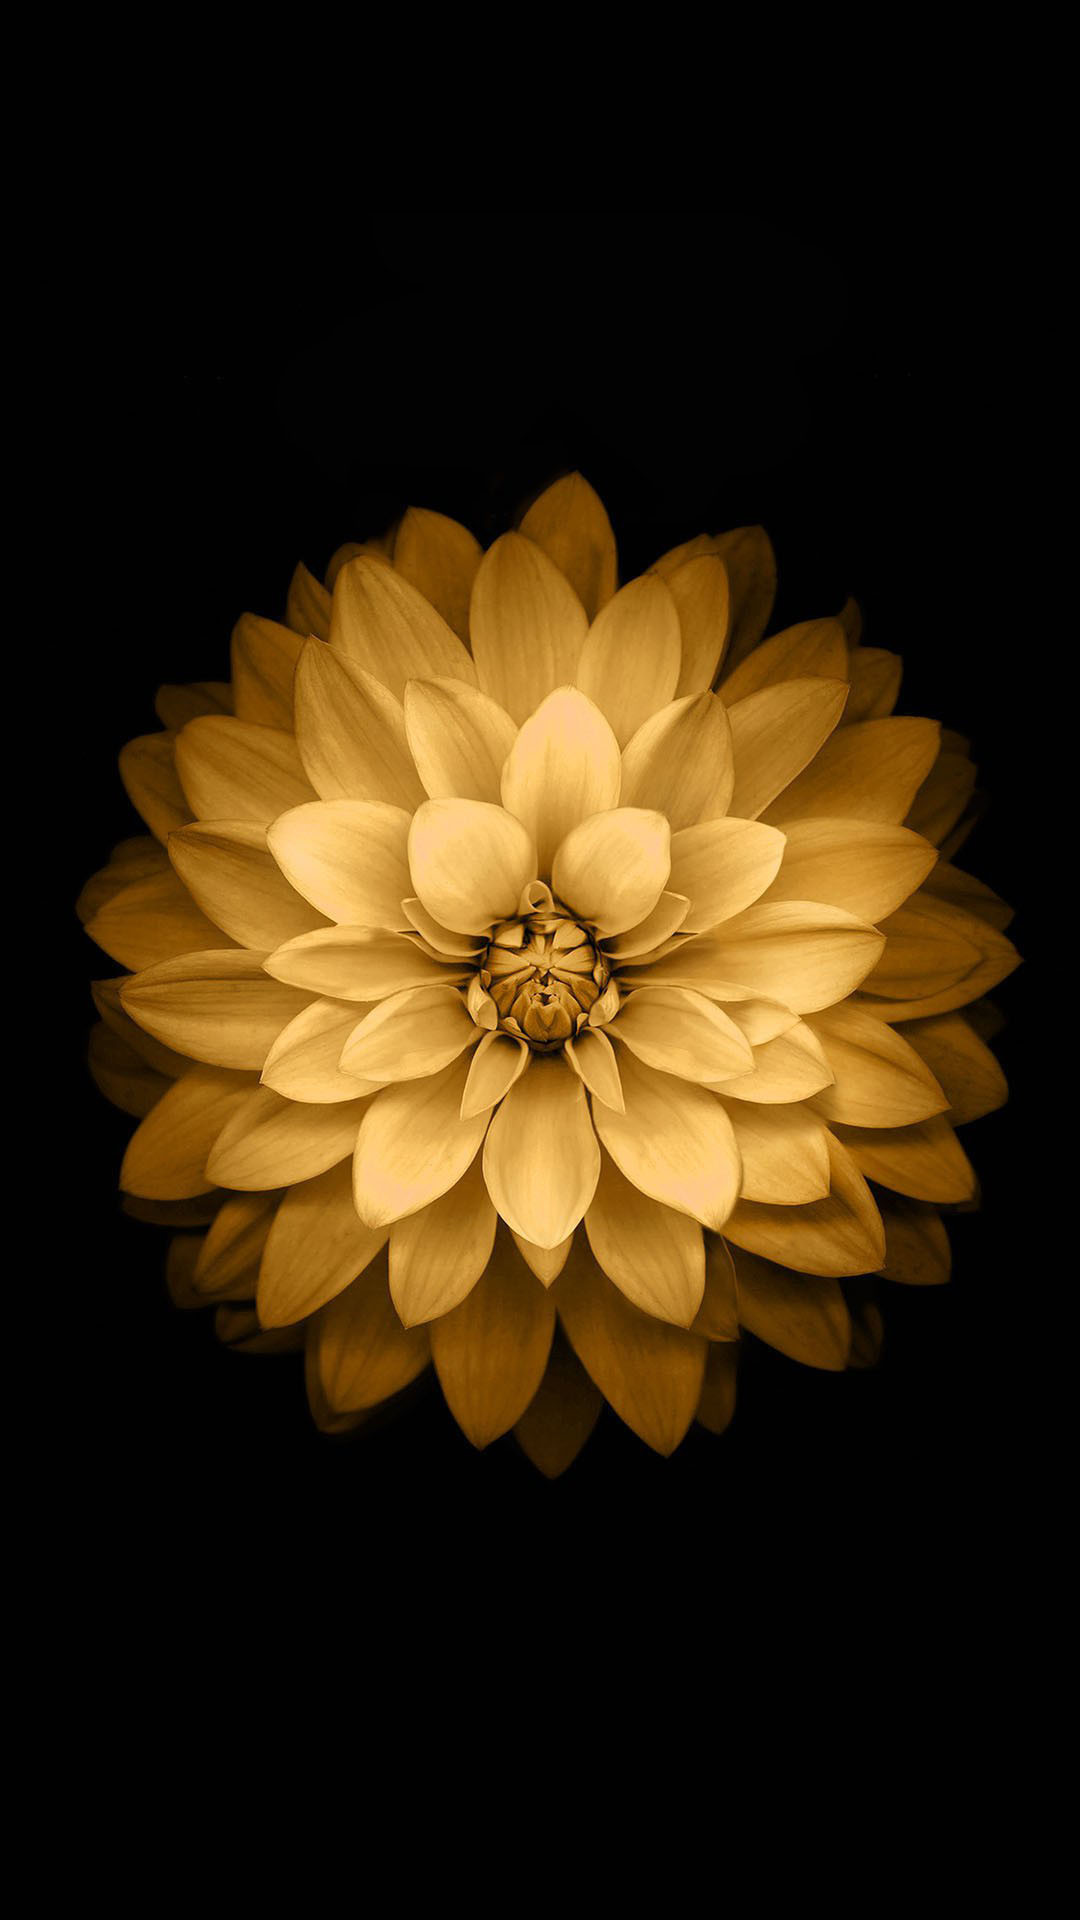 1080x1920 Golden Lotus Flower iOS Android Wallpaper ...